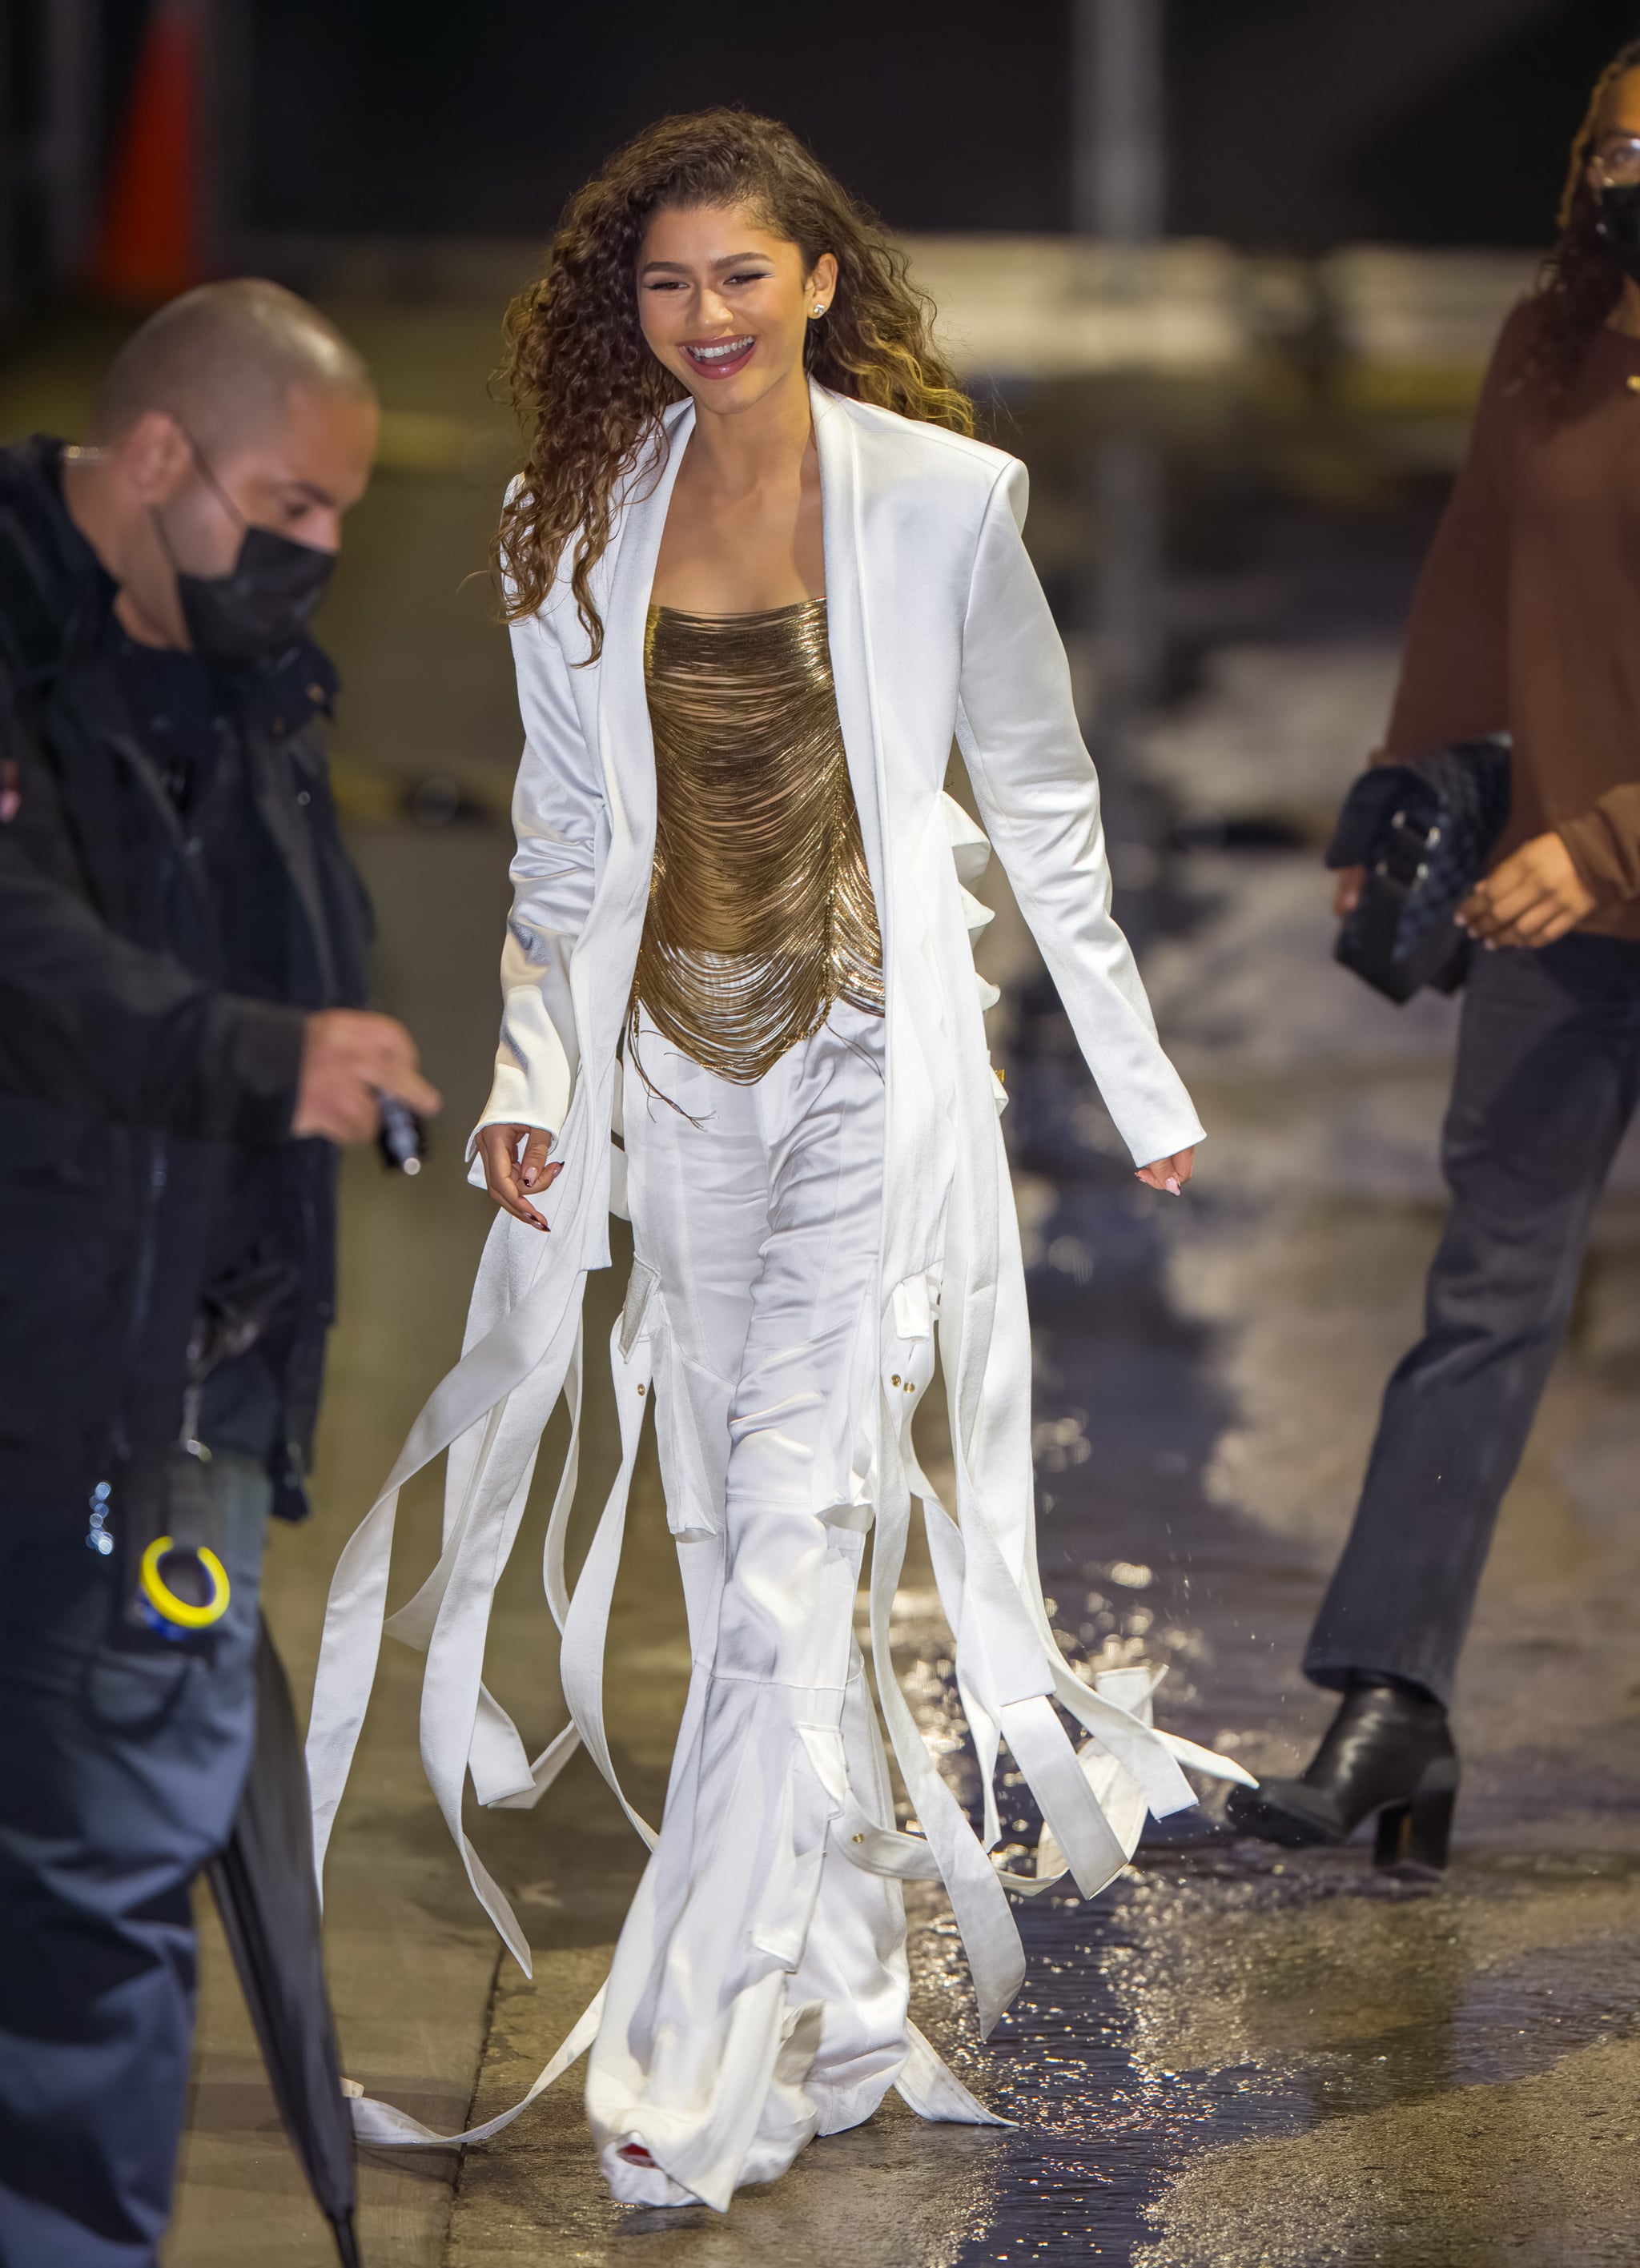 Zendaya Wearing a Balmain Suit and Top For Jimmy Kimmel | Sure, Zendaya's Slinky Chain Top Is Sexy, but We're More by Her Wild Cargo Pants POPSUGAR Fashion UK